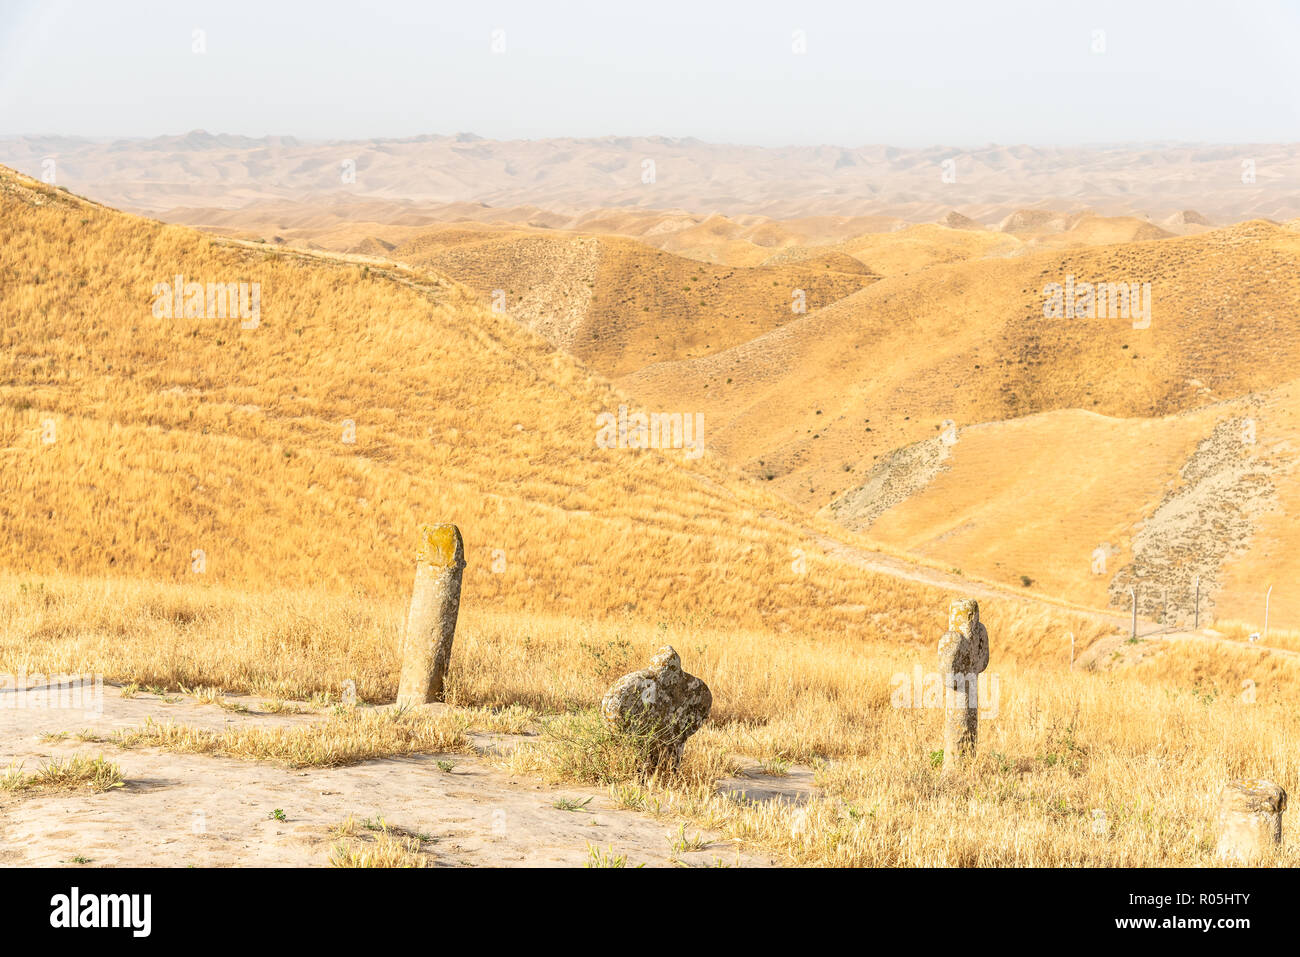 Khaled Nabi cemetery, situated in the Gokcheh Dagh hills of the Turkmen Sahra in Golestan, Northern Iran Stock Photo